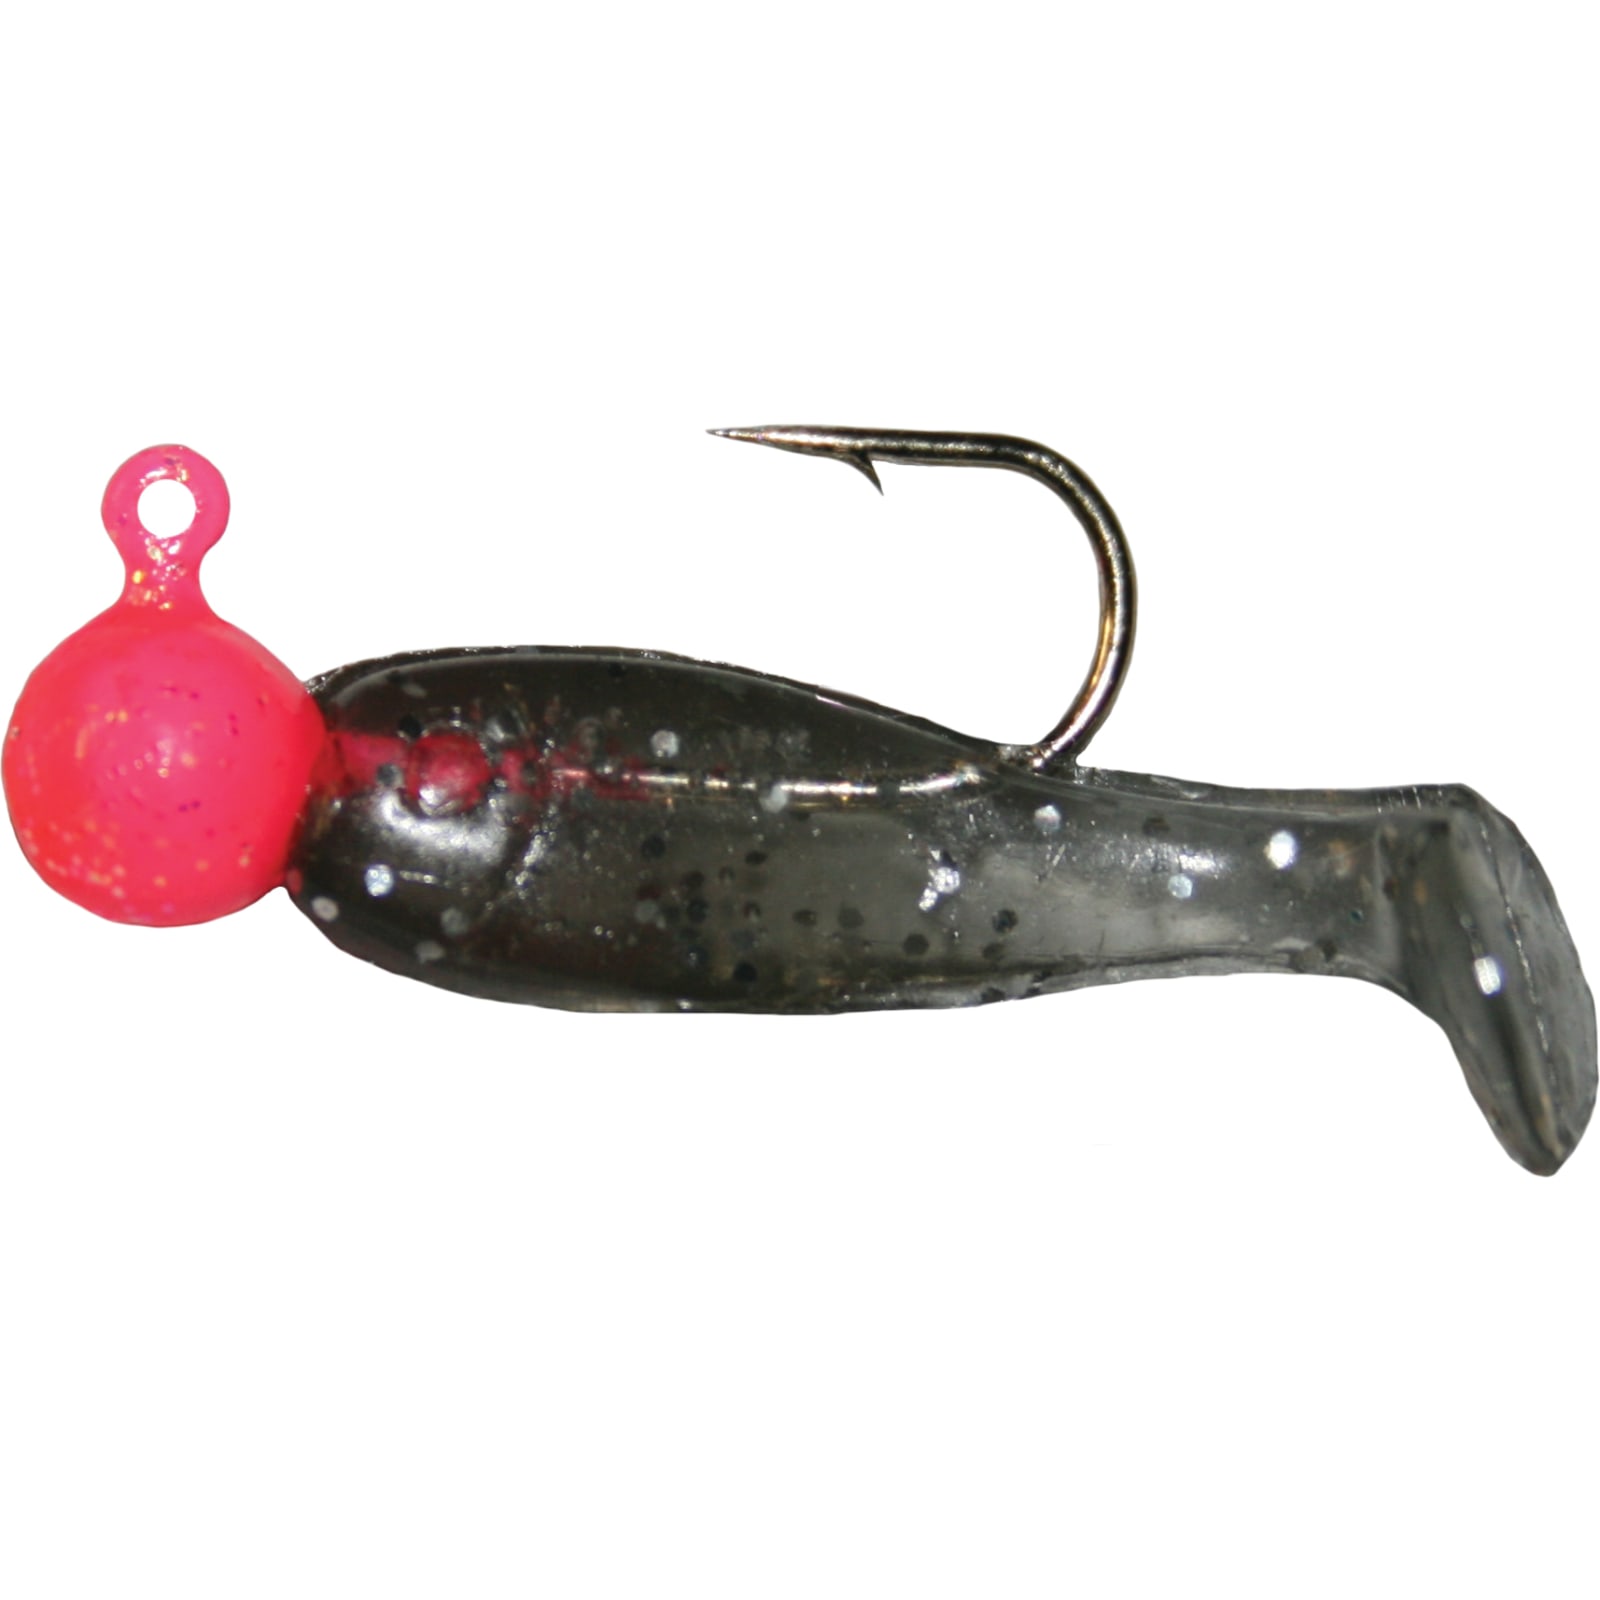 Whip'r Shad - Pink/Shad by K & E Tackle at Fleet Farm